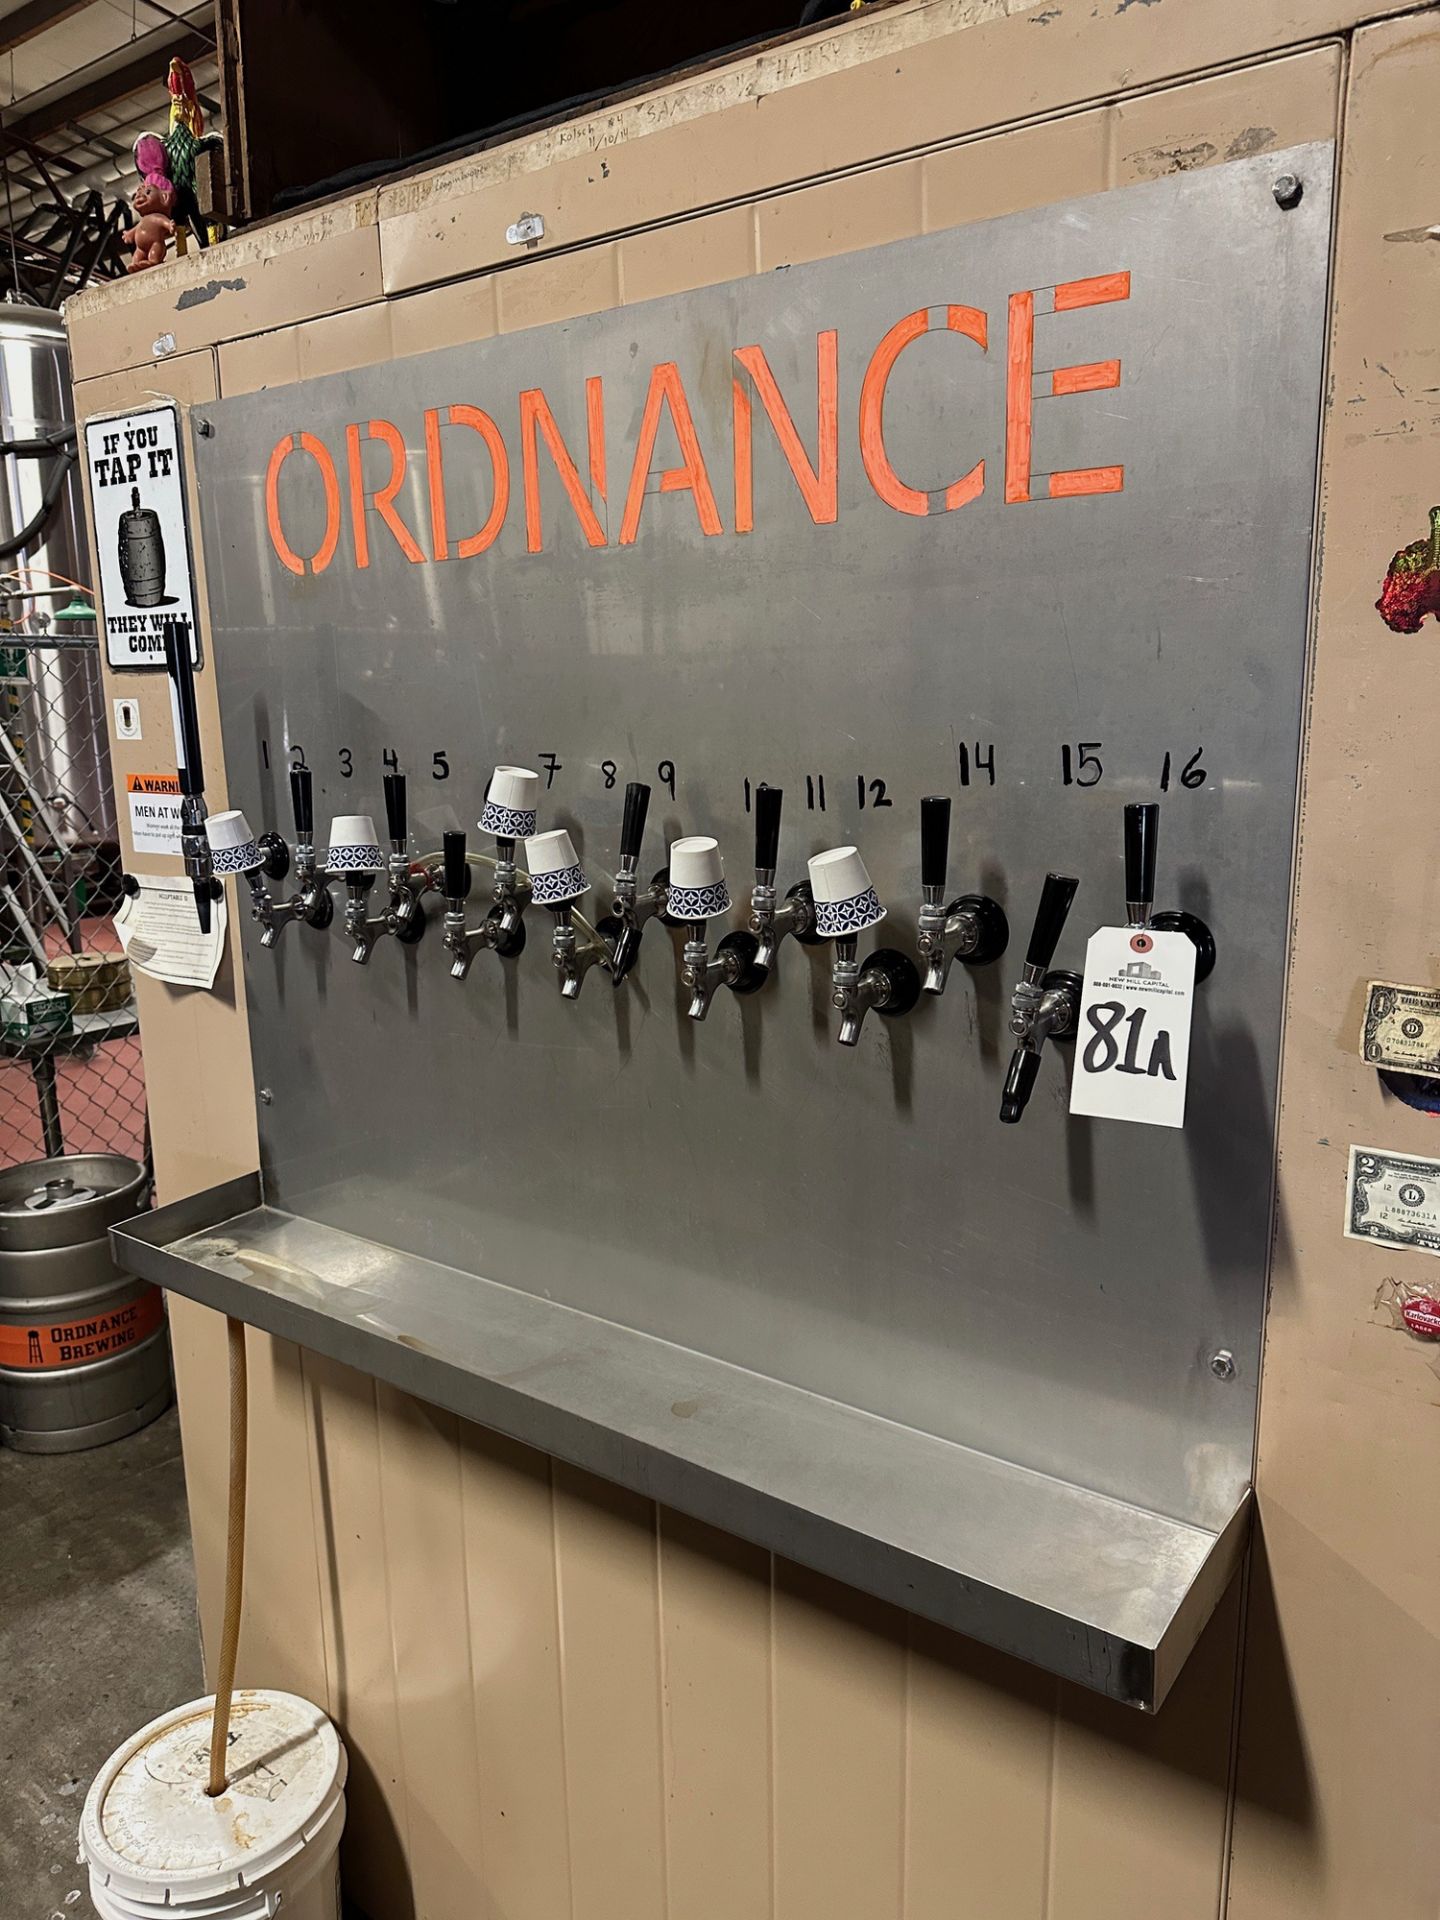 Stainless Steel Wall Mounted 15-Handled Draft Tower with Drain Pan, Regulators and | Rig Fee $350